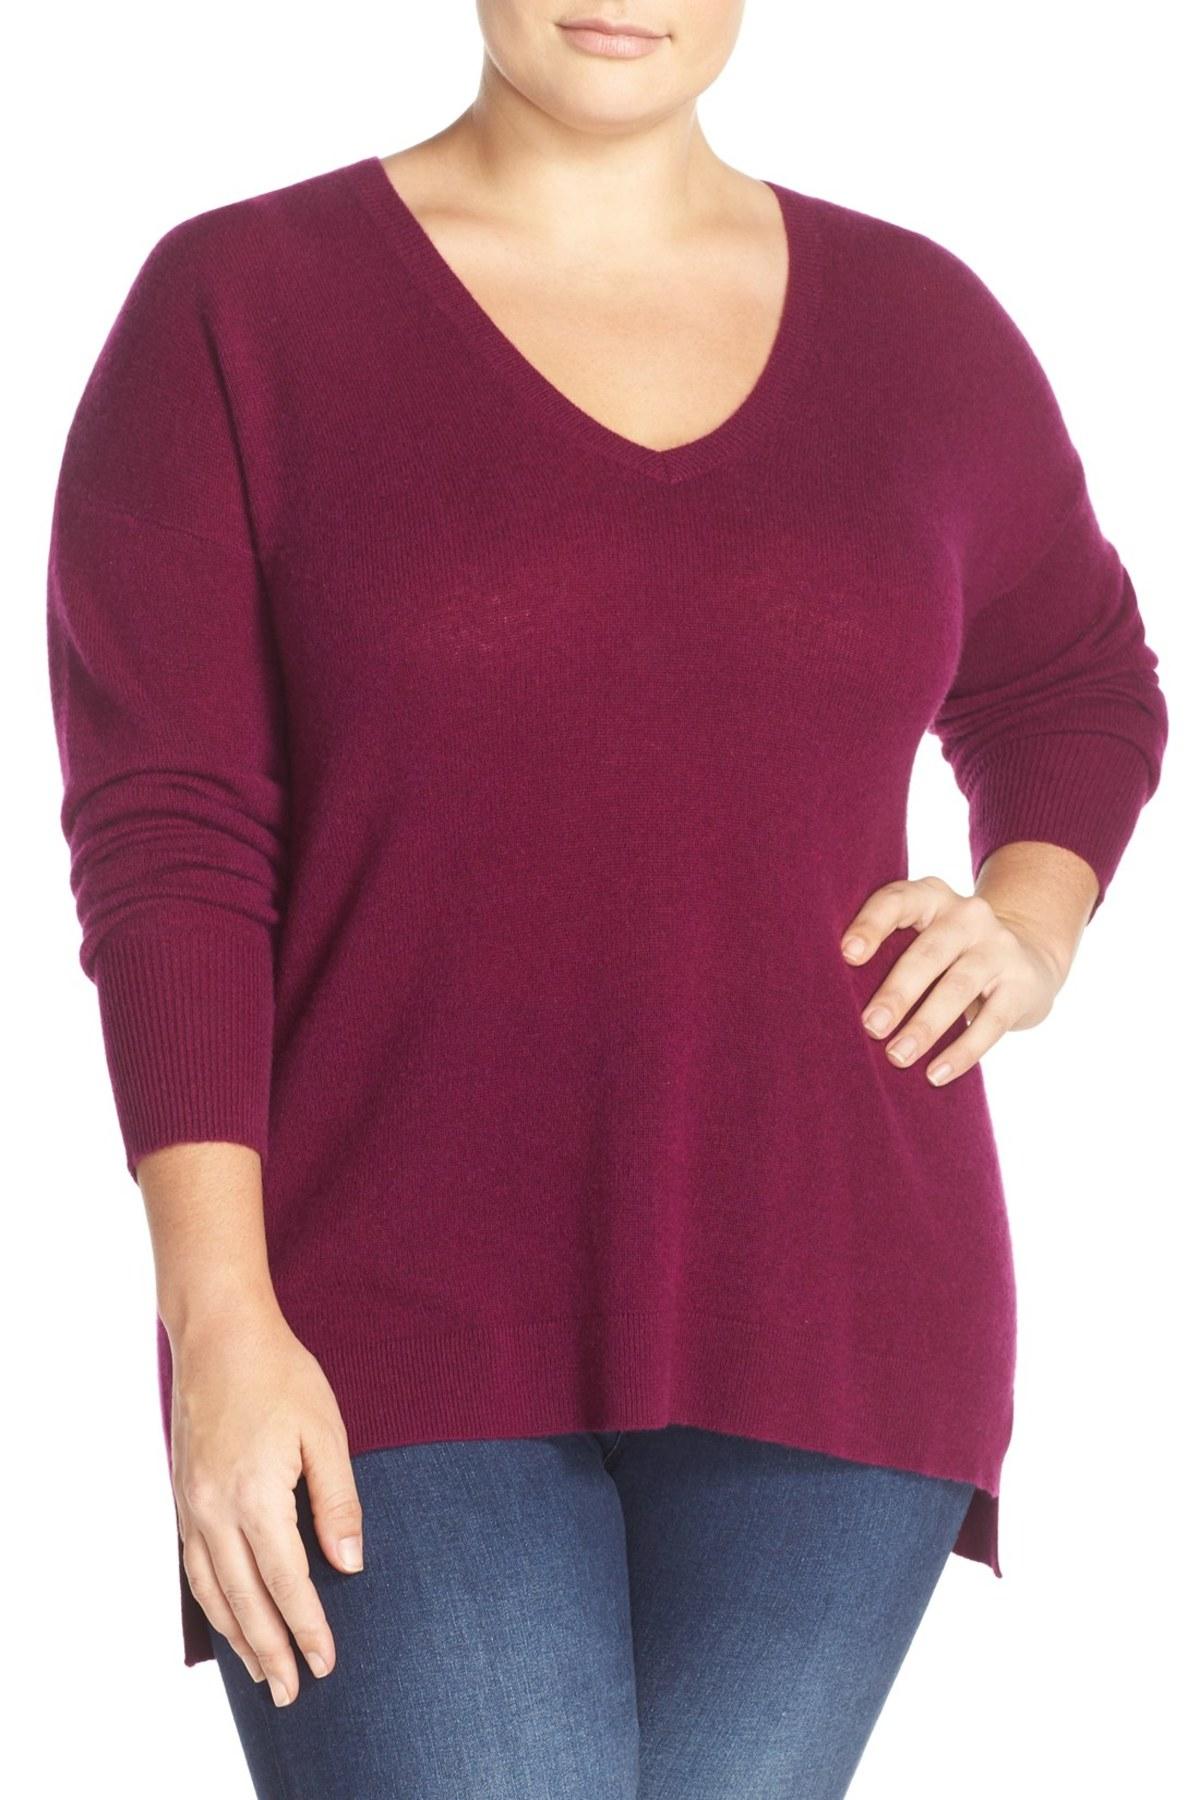 Cashmere sweater for plus size